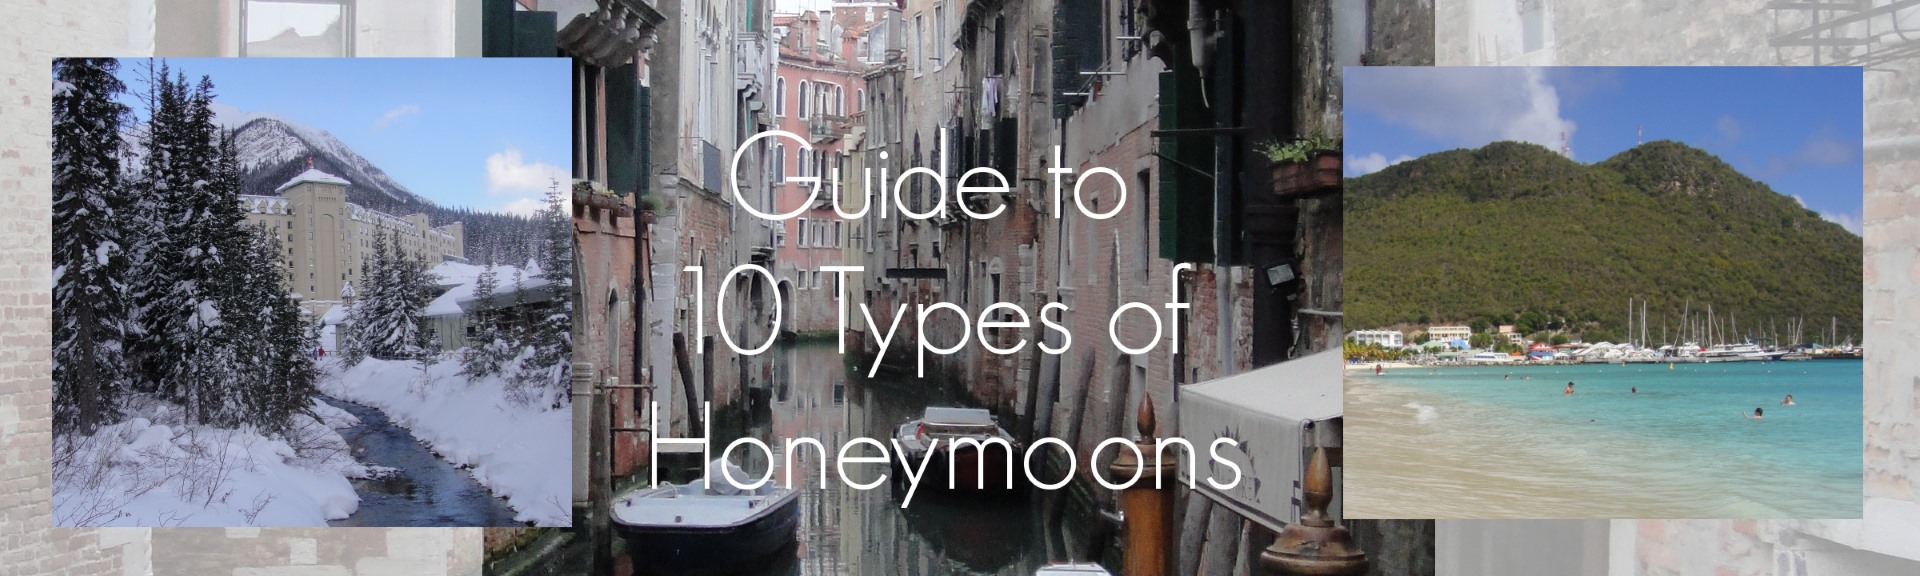 types-of-honeymoons-guide-1920w